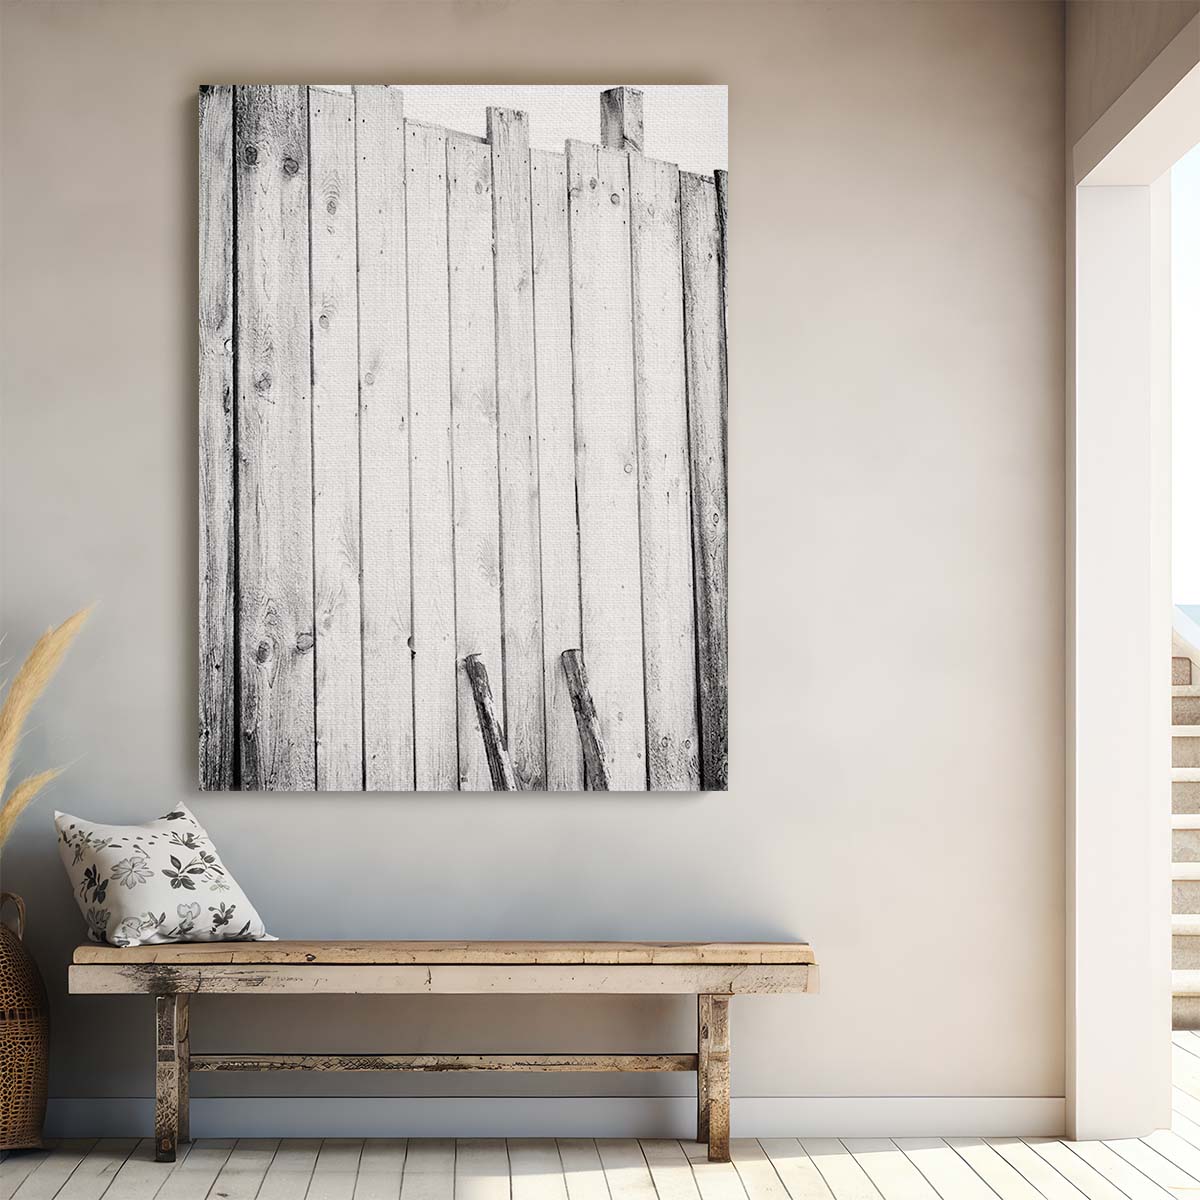 Lonely Bird Escaping Solitude - Black and White Photography Wall Art by Luxuriance Designs, made in USA